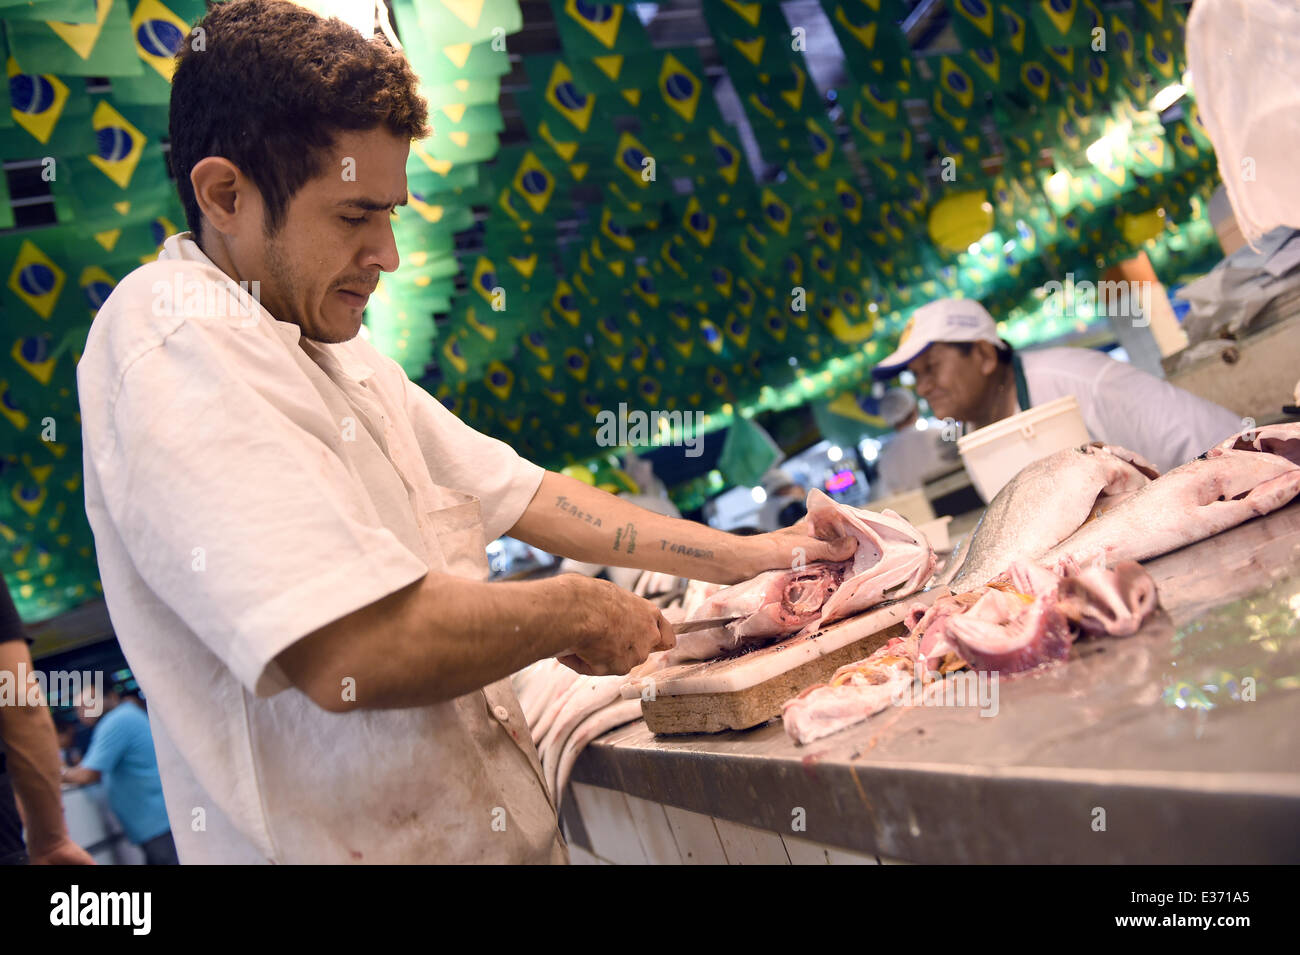 Manaus, Brazil. 22nd June, 2014. A Brazilian fresh fish-seller cuts fish at a fish and food market in Manaus, Brazil, 22 June 2014. Portugal faces the USA in a FIFA World Cup 2014 group G preliminary round match in Manaus on 22 June. Photo: Marius Becker/dpa/Alamy Live News Stock Photo